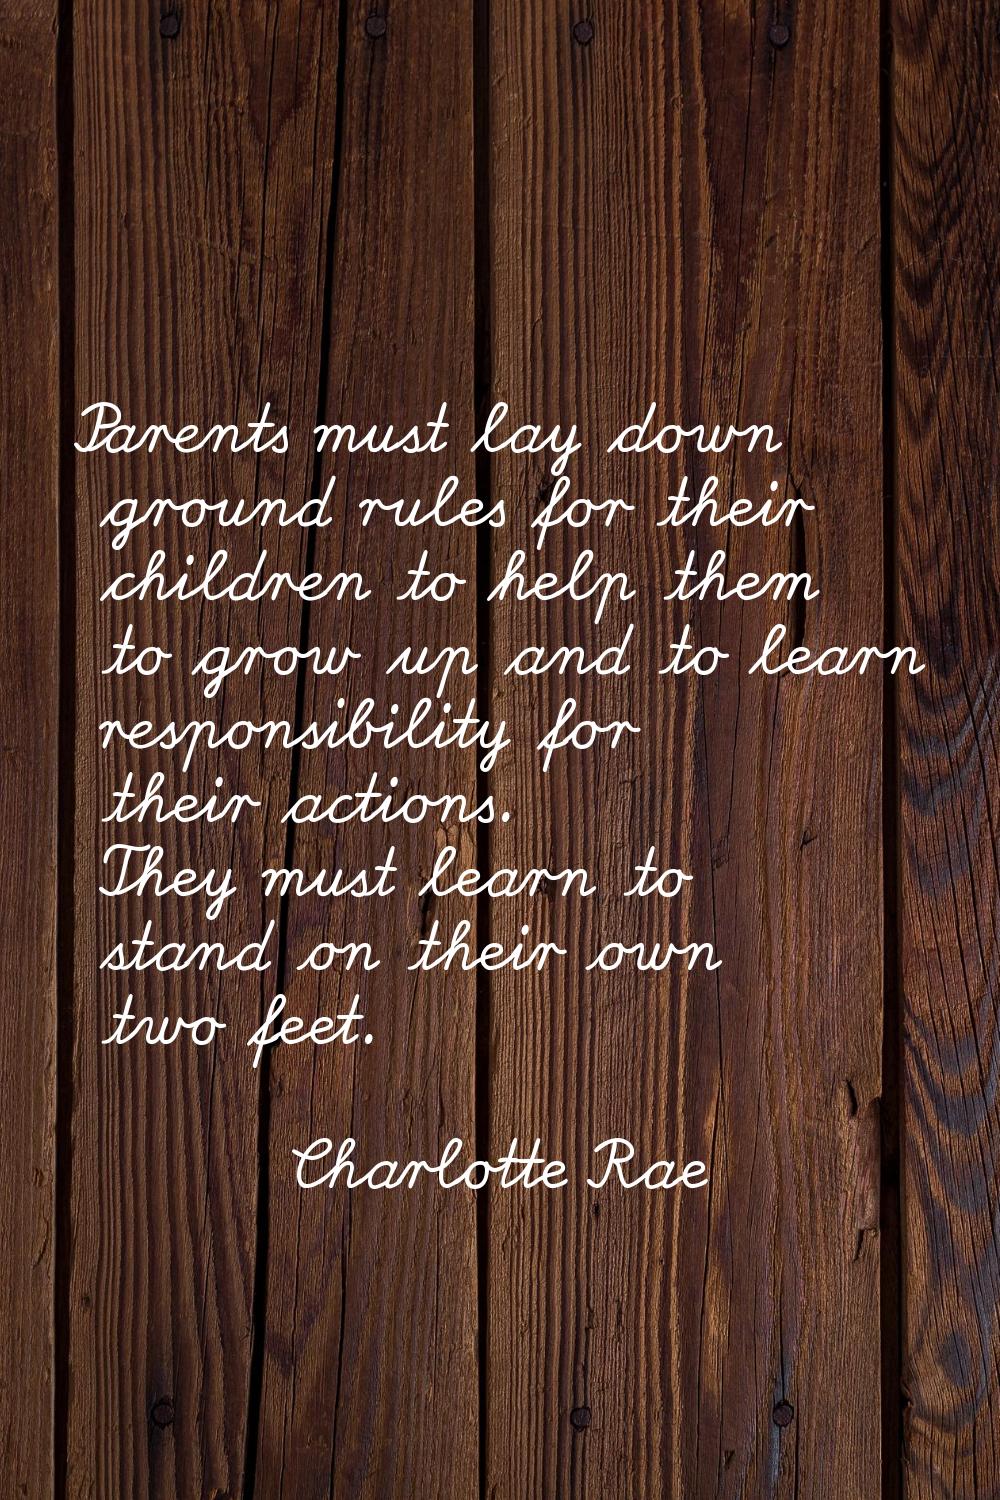 Parents must lay down ground rules for their children to help them to grow up and to learn responsi